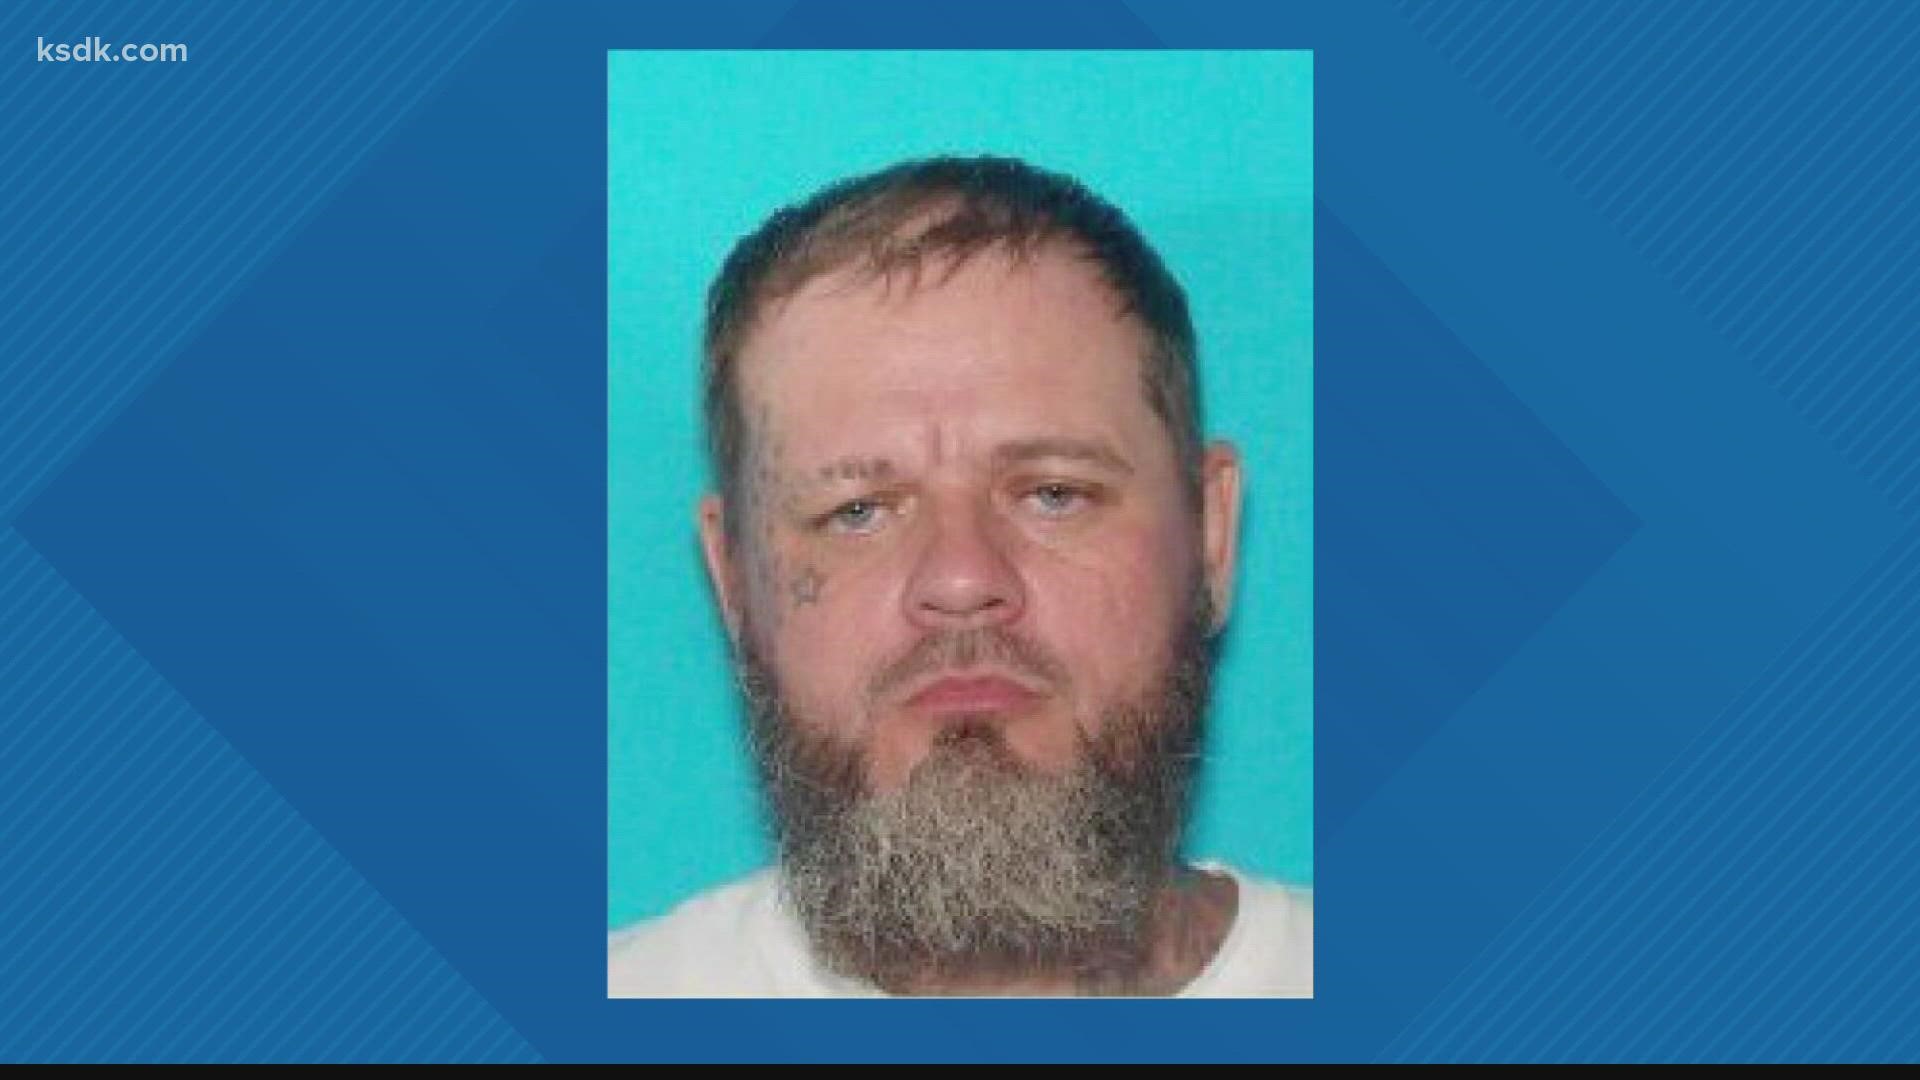 The Jefferson County, Illinois, Sheriff's Office said Ray Tate got out of his cell early Sunday morning.